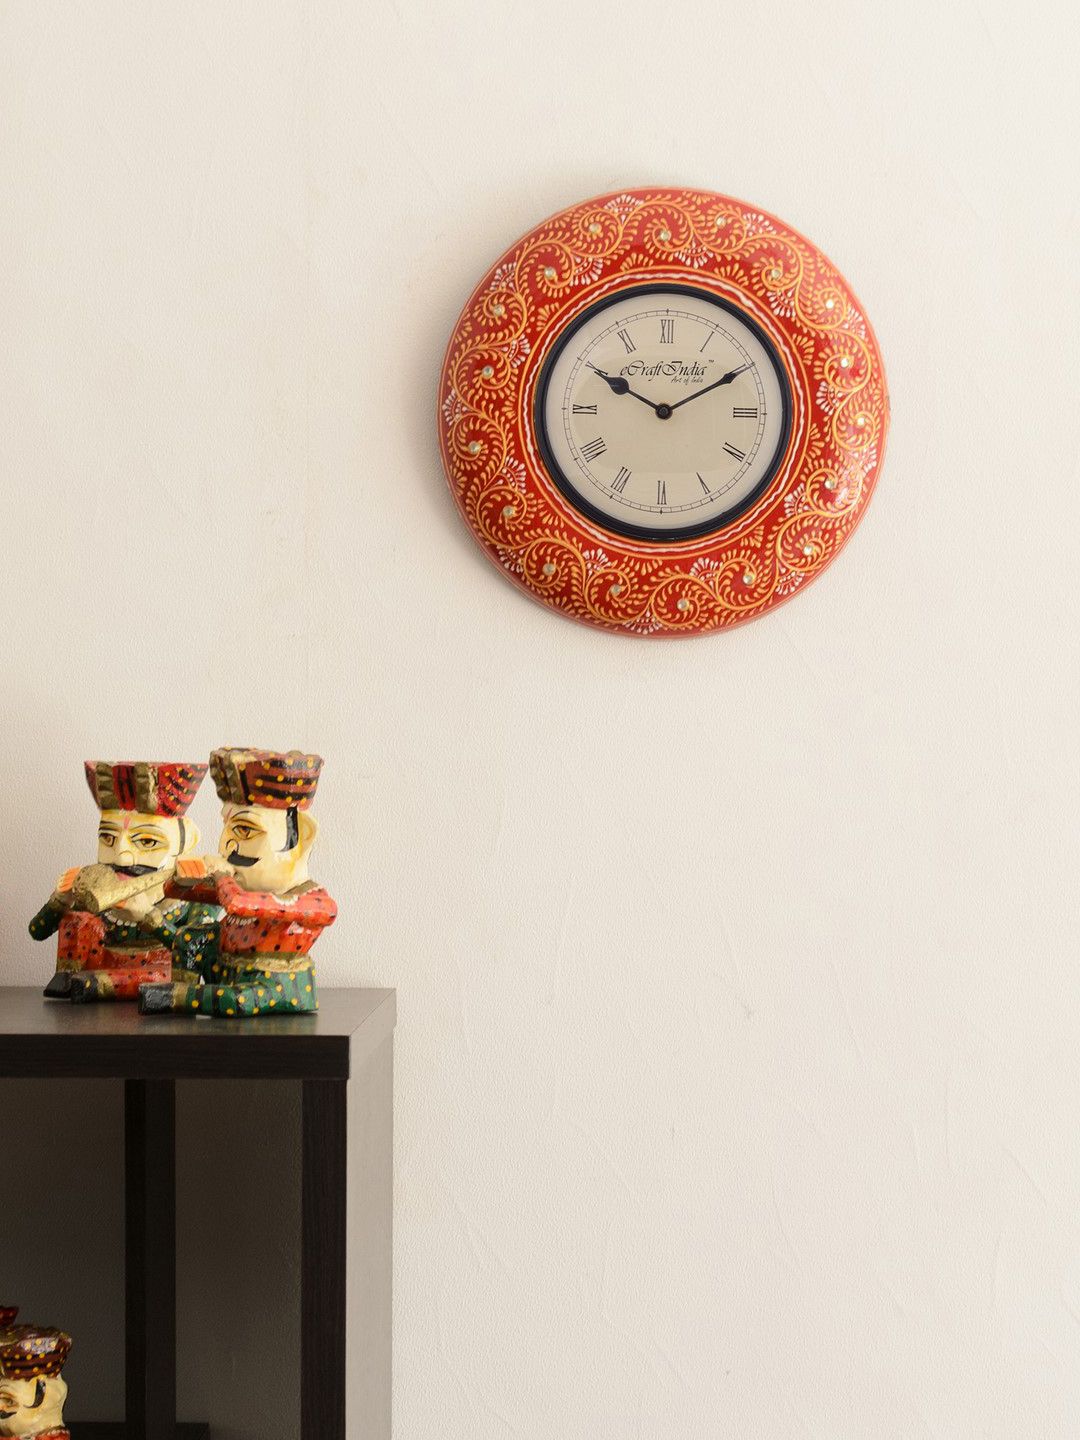 eCraftIndia Red & Gold-Toned Handcrafted Round Printed Analogue Wall Clock Price in India